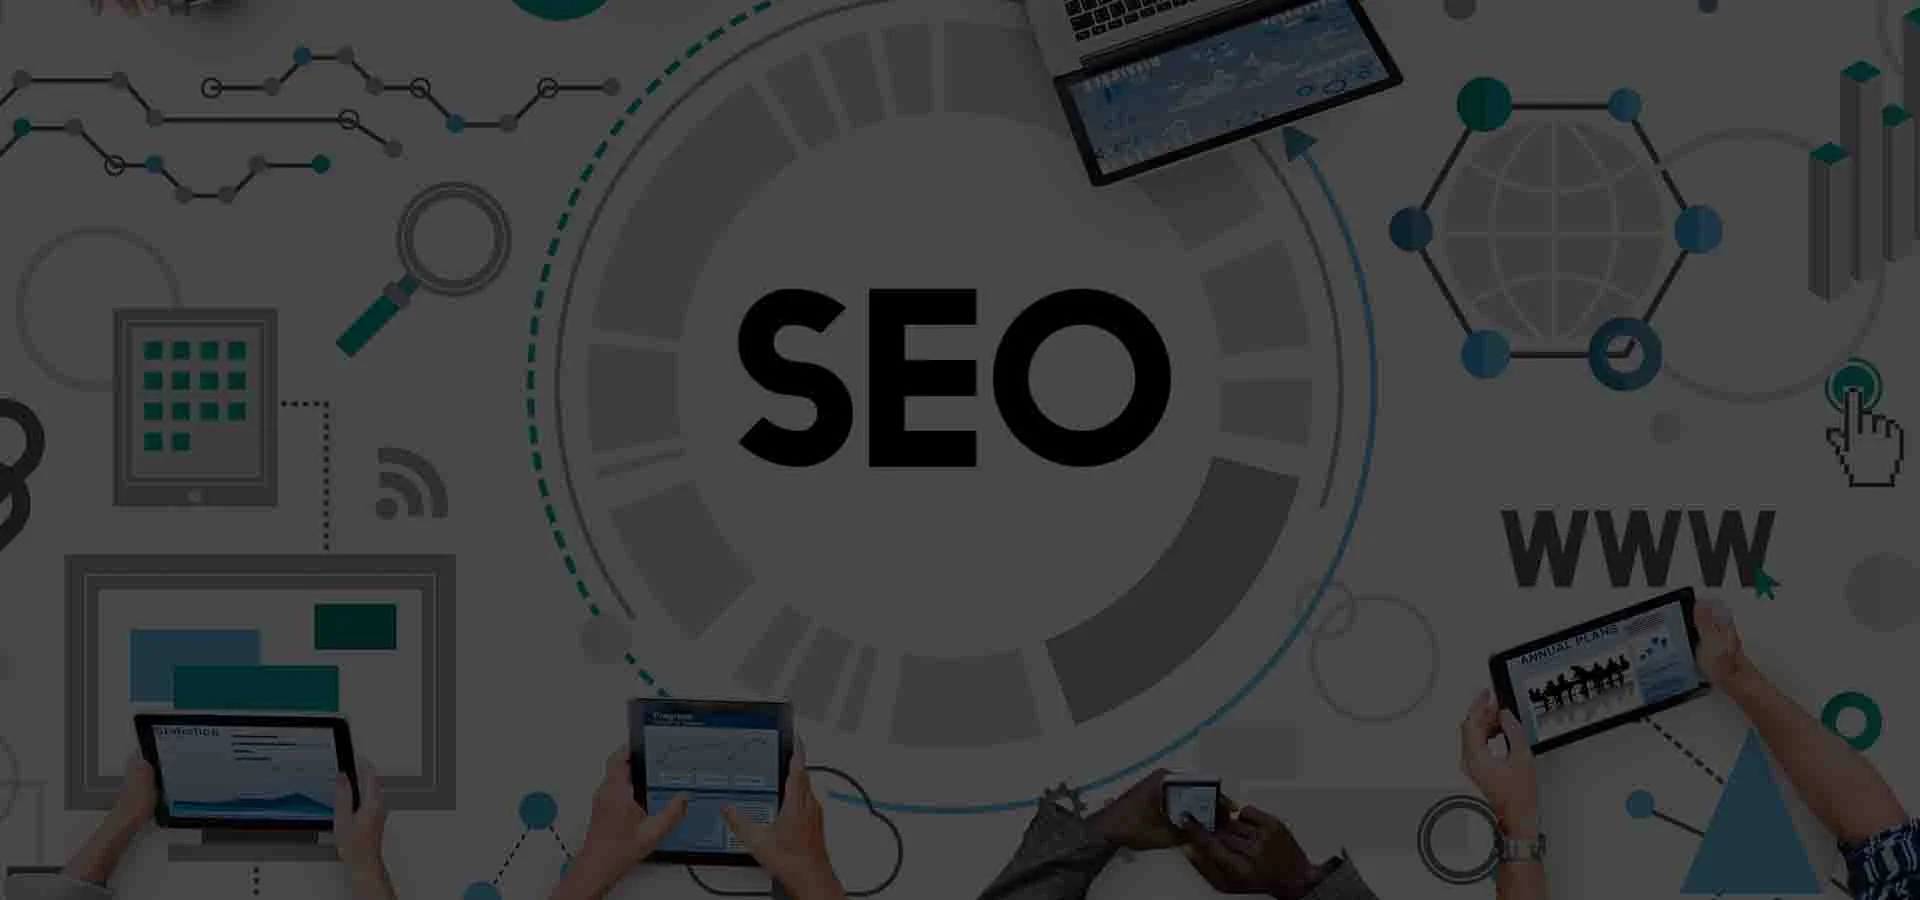 what-are-the-top-10-seo-tactics-beneficial-for-businesses-in-2020-related-blog-17